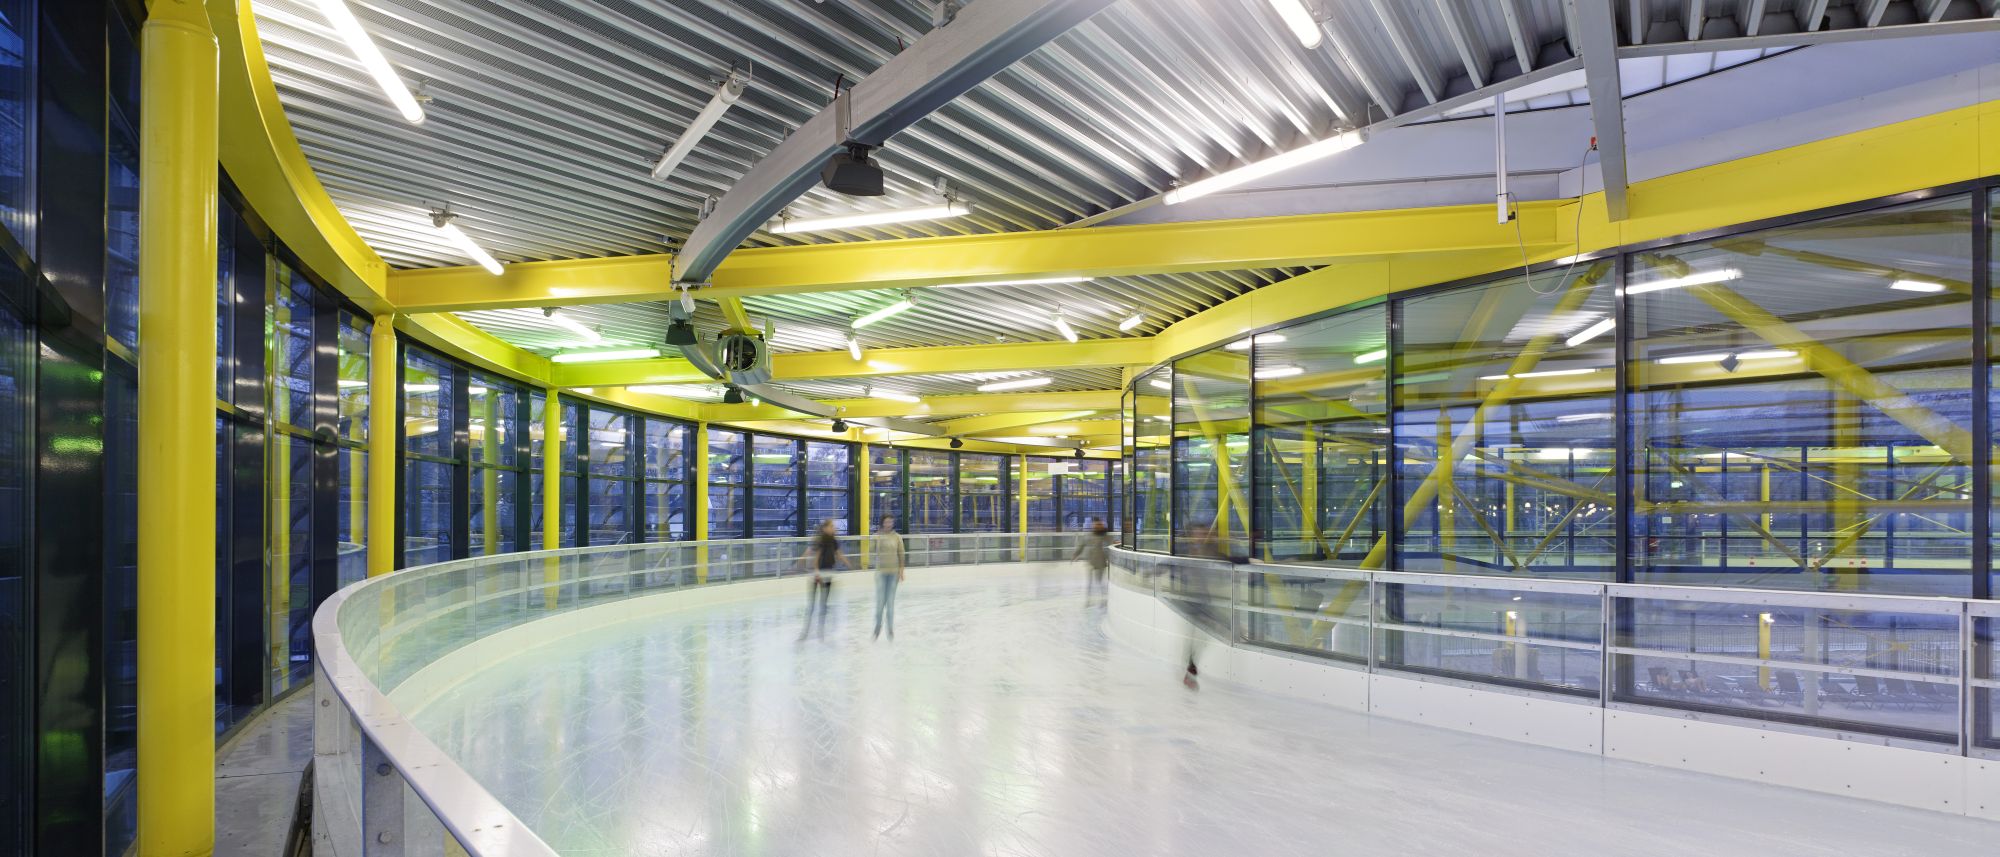 A view of the ice skating track around the central area of the building, complemented by striking yellow structural elements.